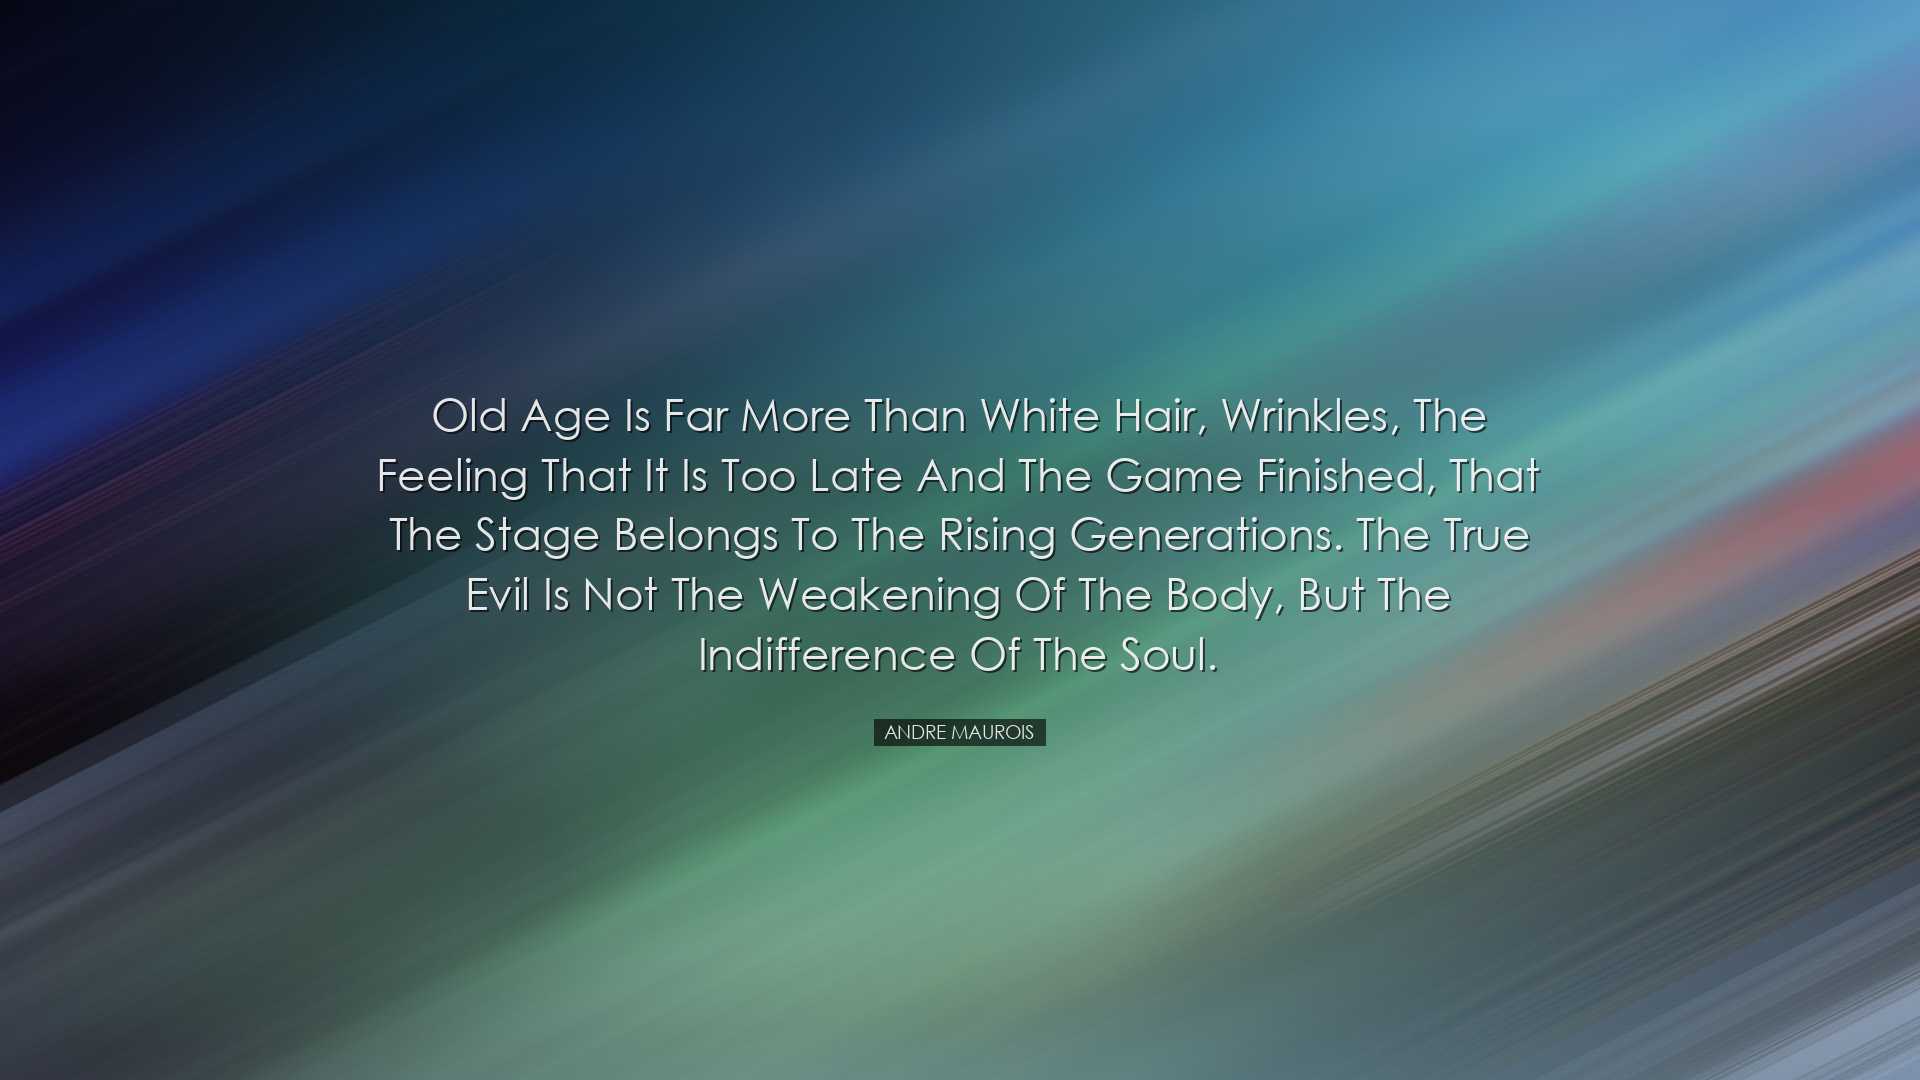 Old age is far more than white hair, wrinkles, the feeling that it